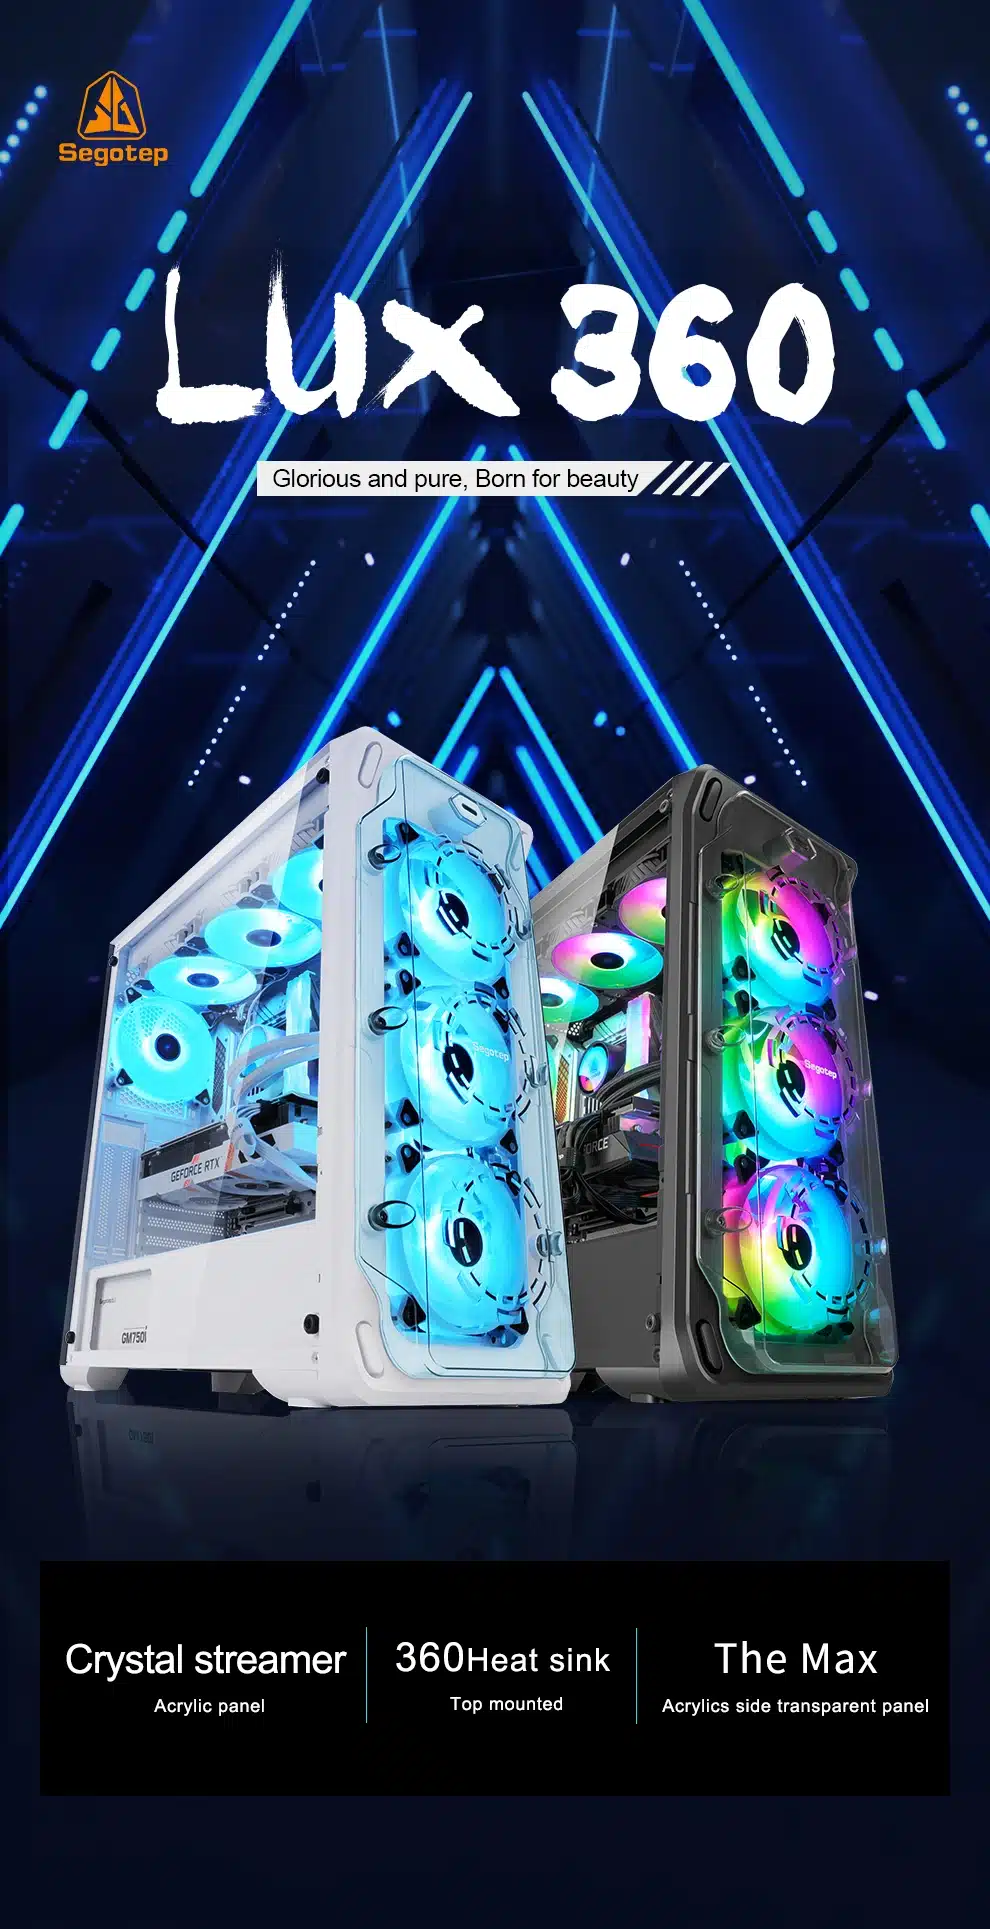 Segotep Lux 360, 2022 New Coming Eatx Gaming Case, 360 Radiator Top/Front Mount Support, Full Transparency RGB LED Gaming Case